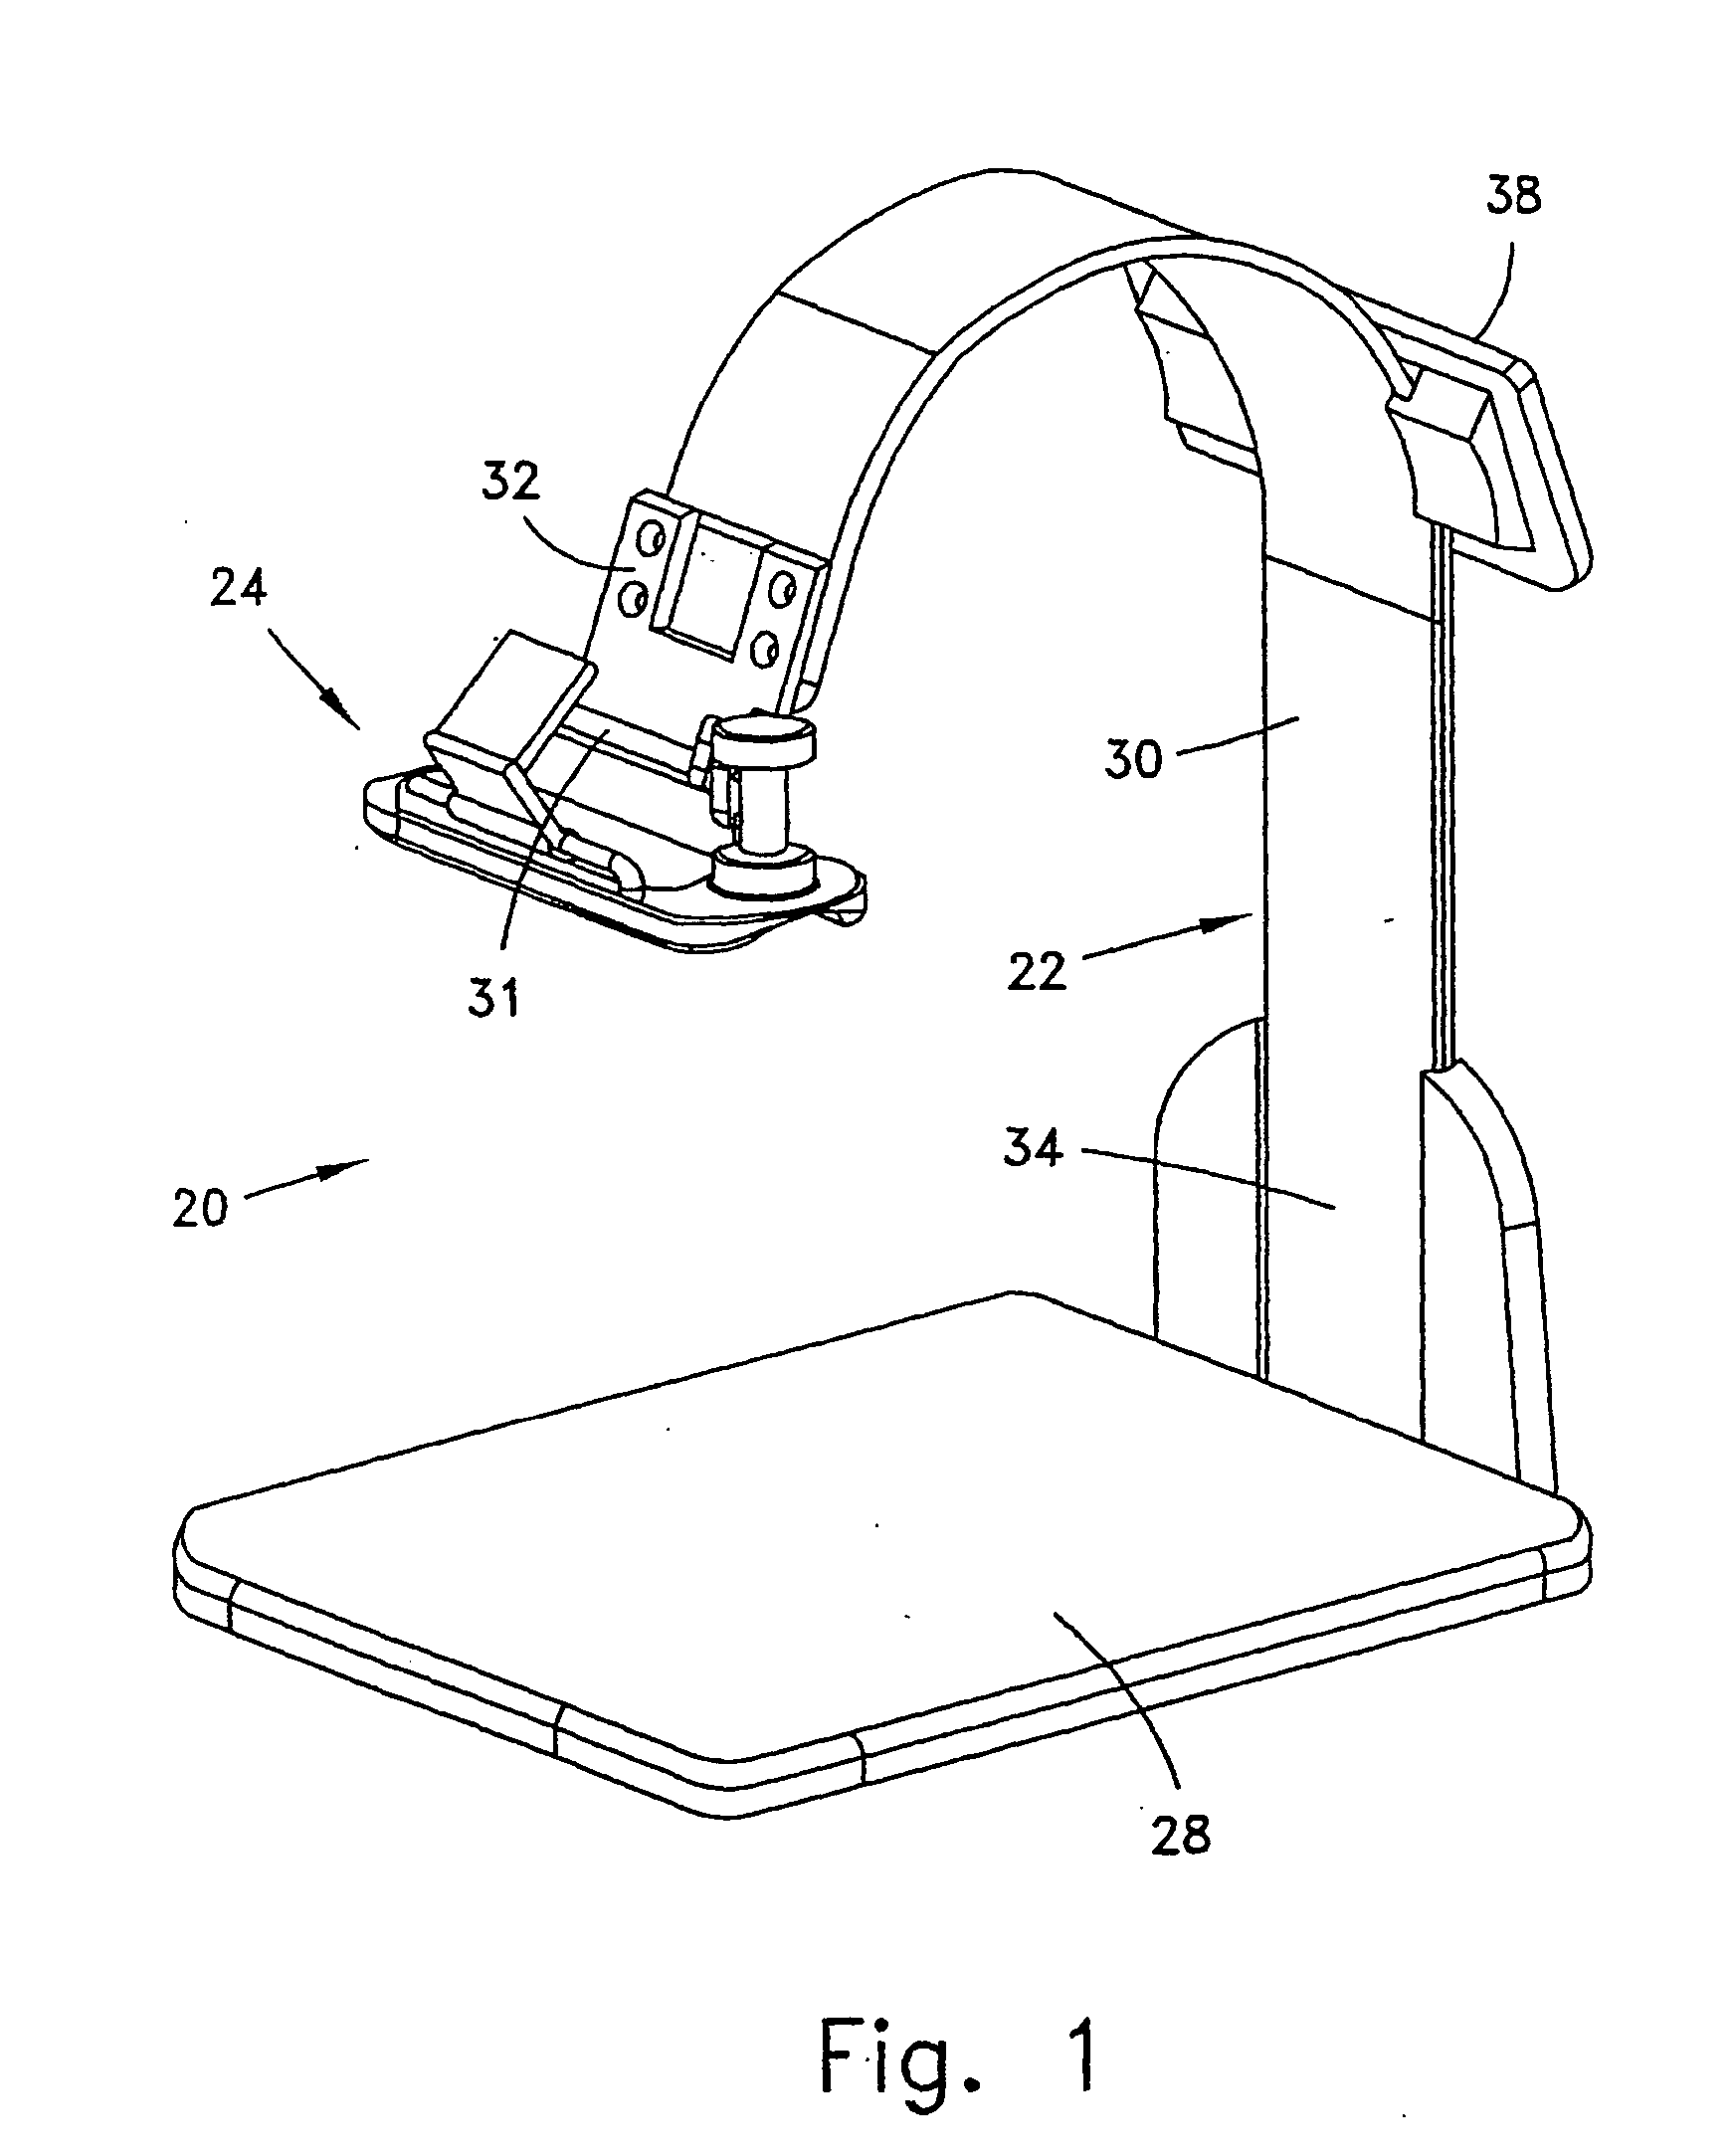 Apparatus for sealing a puncture in a blood vessel